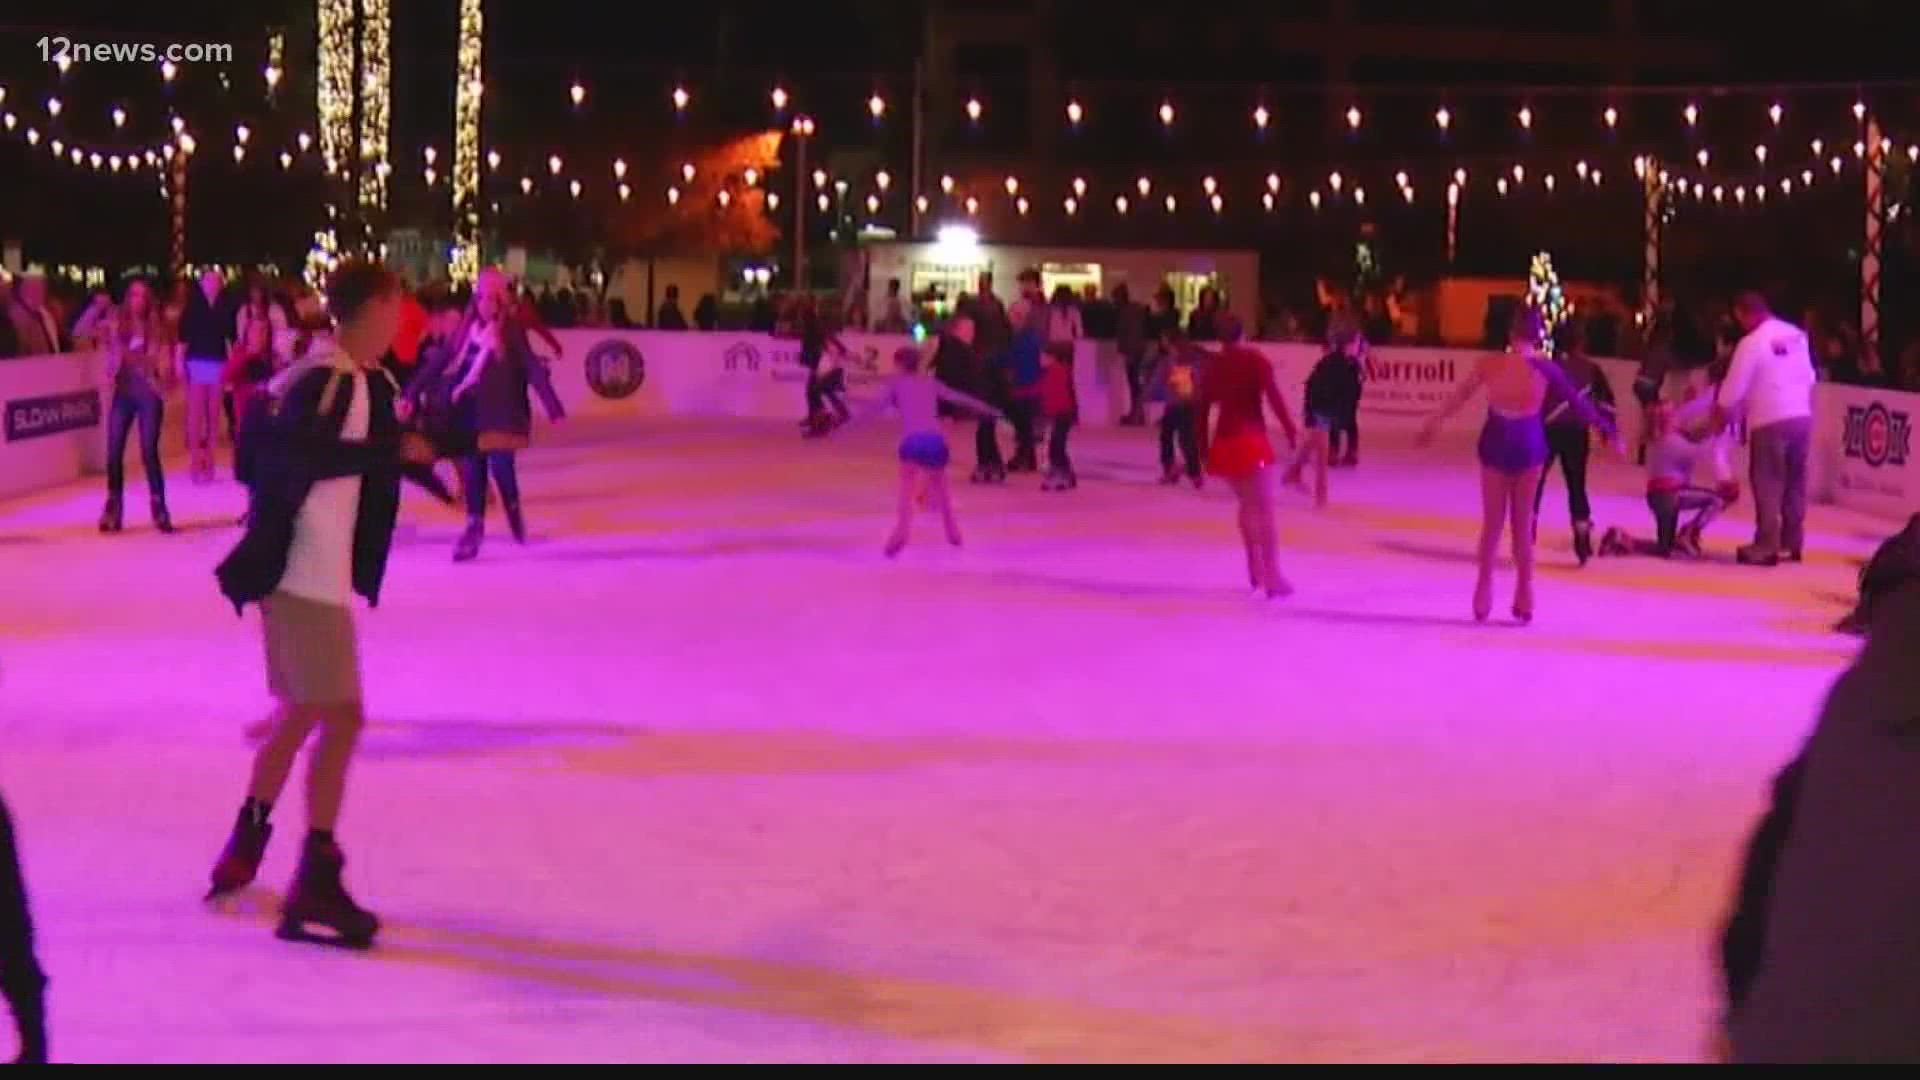 The holiday celebration is back in the Valley city with carolers, an ice skating rink and the city's iconic Chirstmas tree.